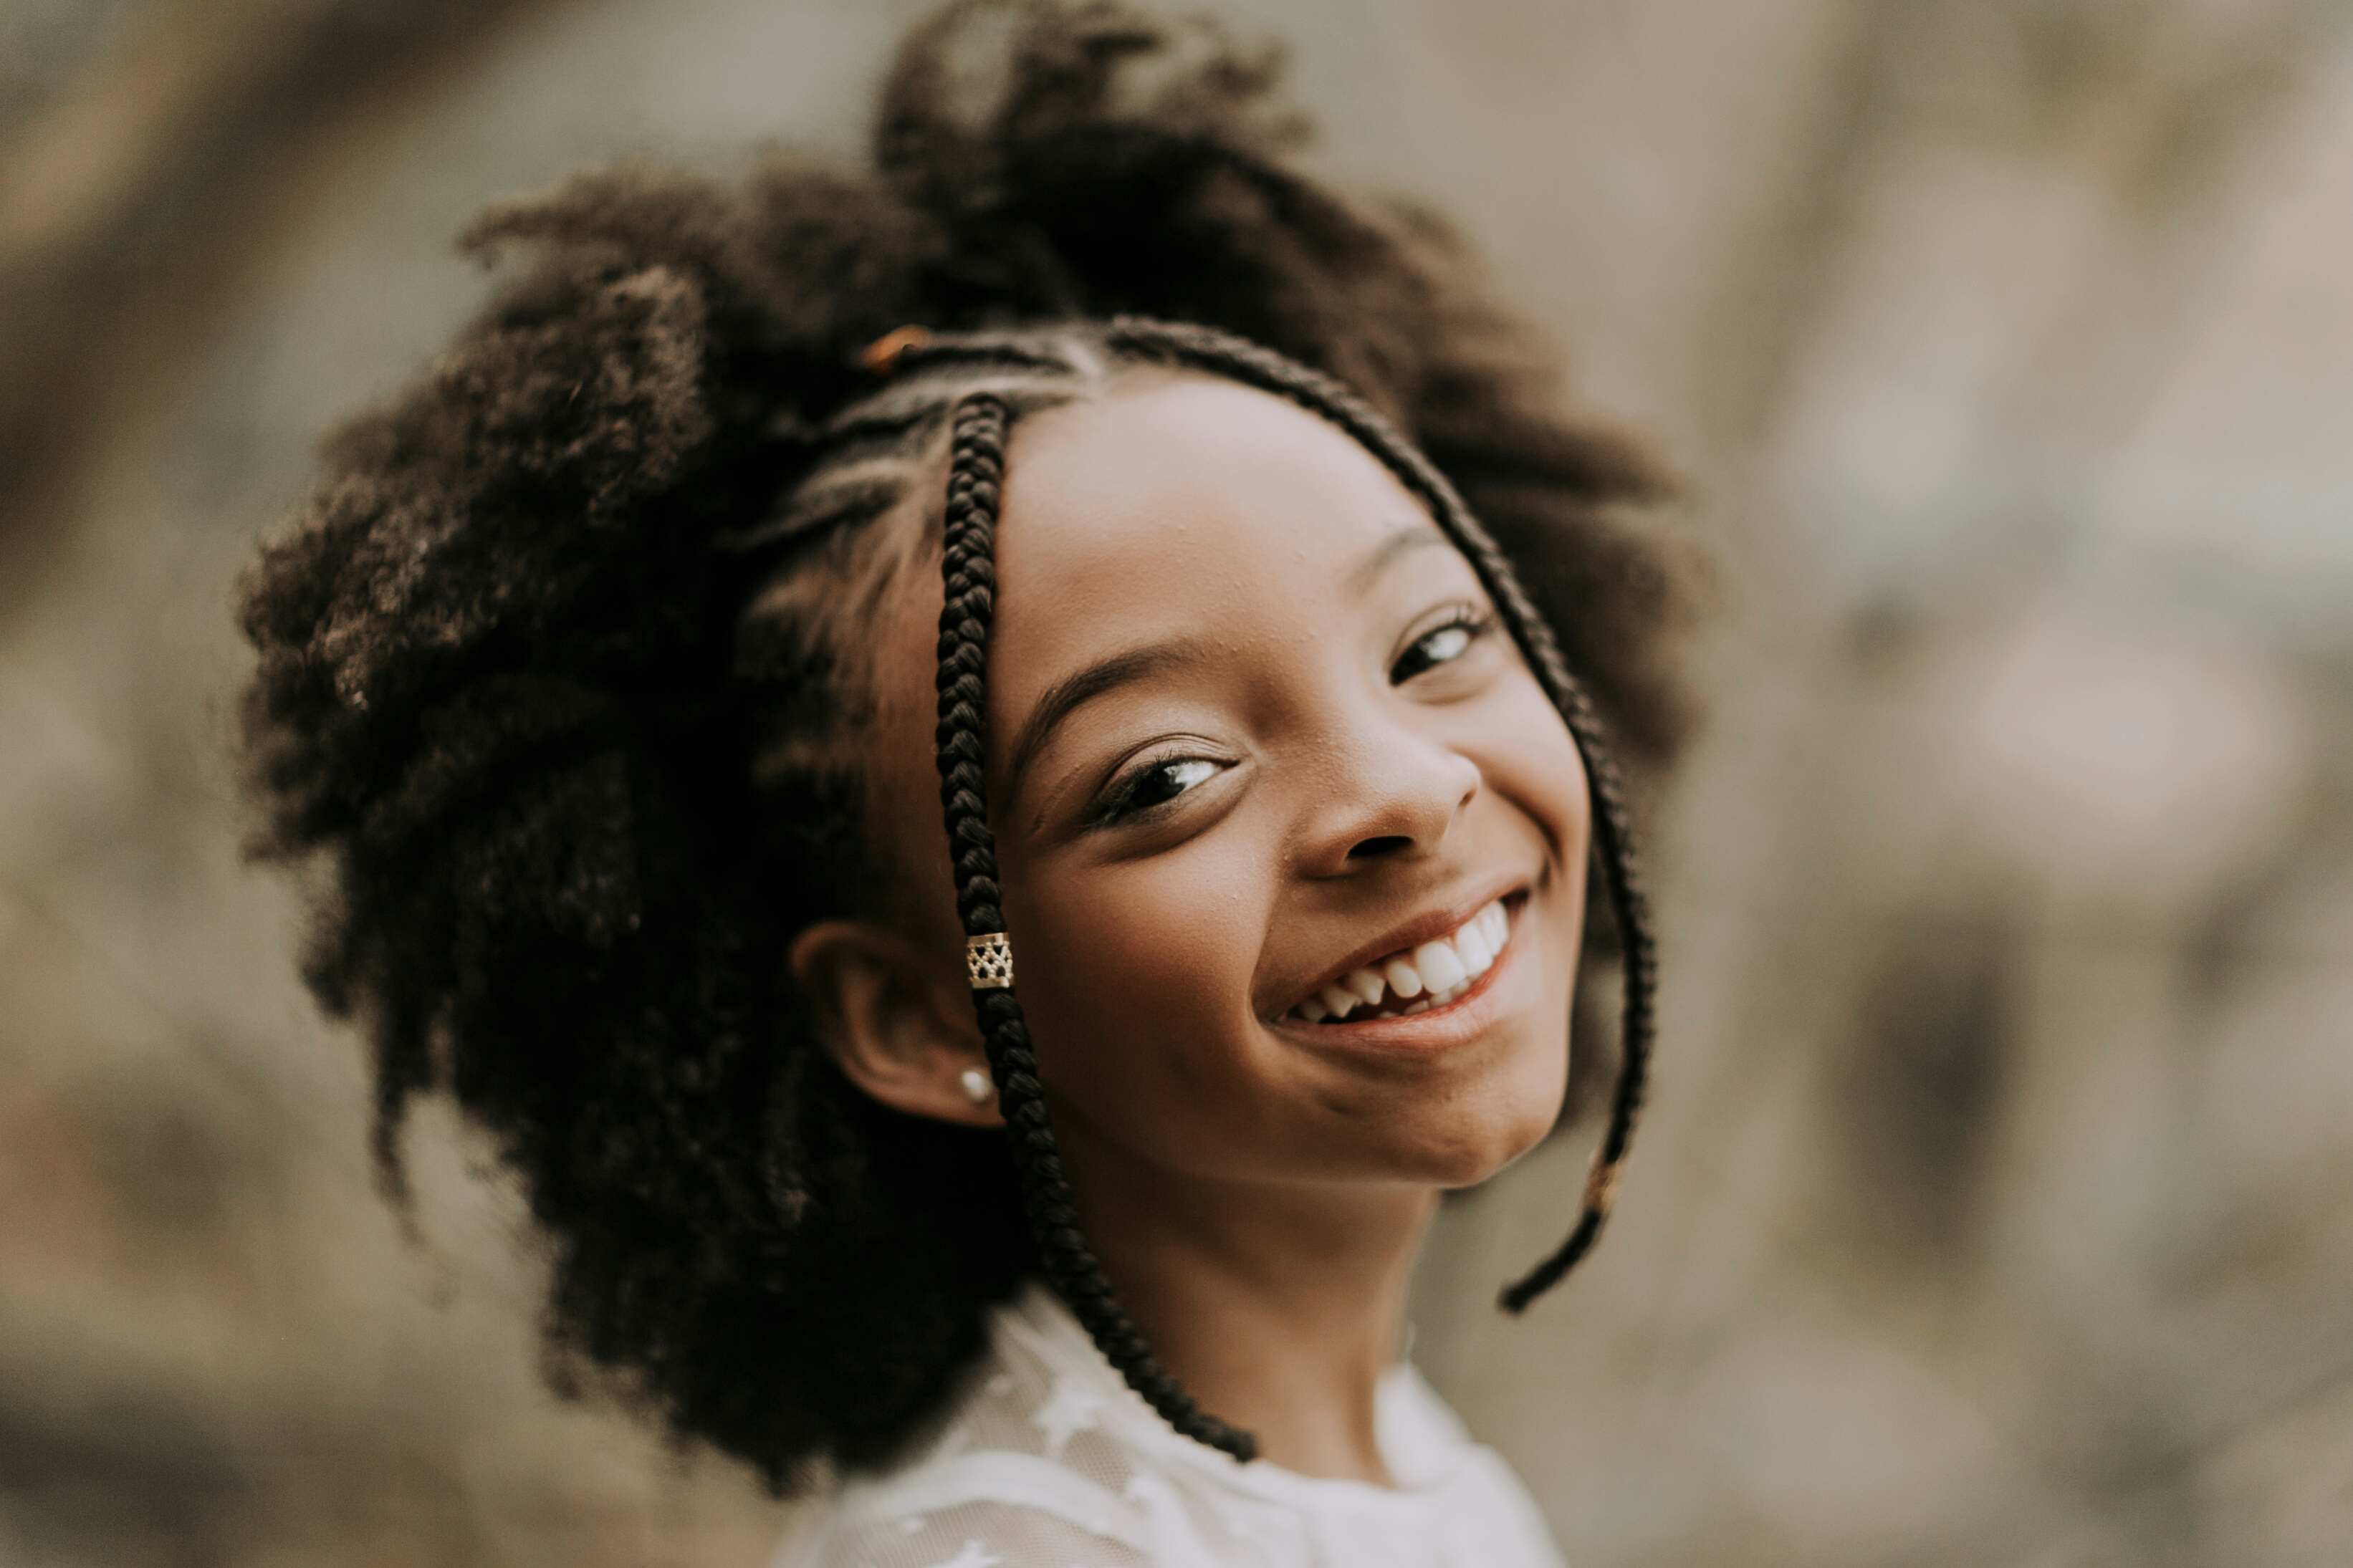 Cheerful black girl with Afro hairstyle